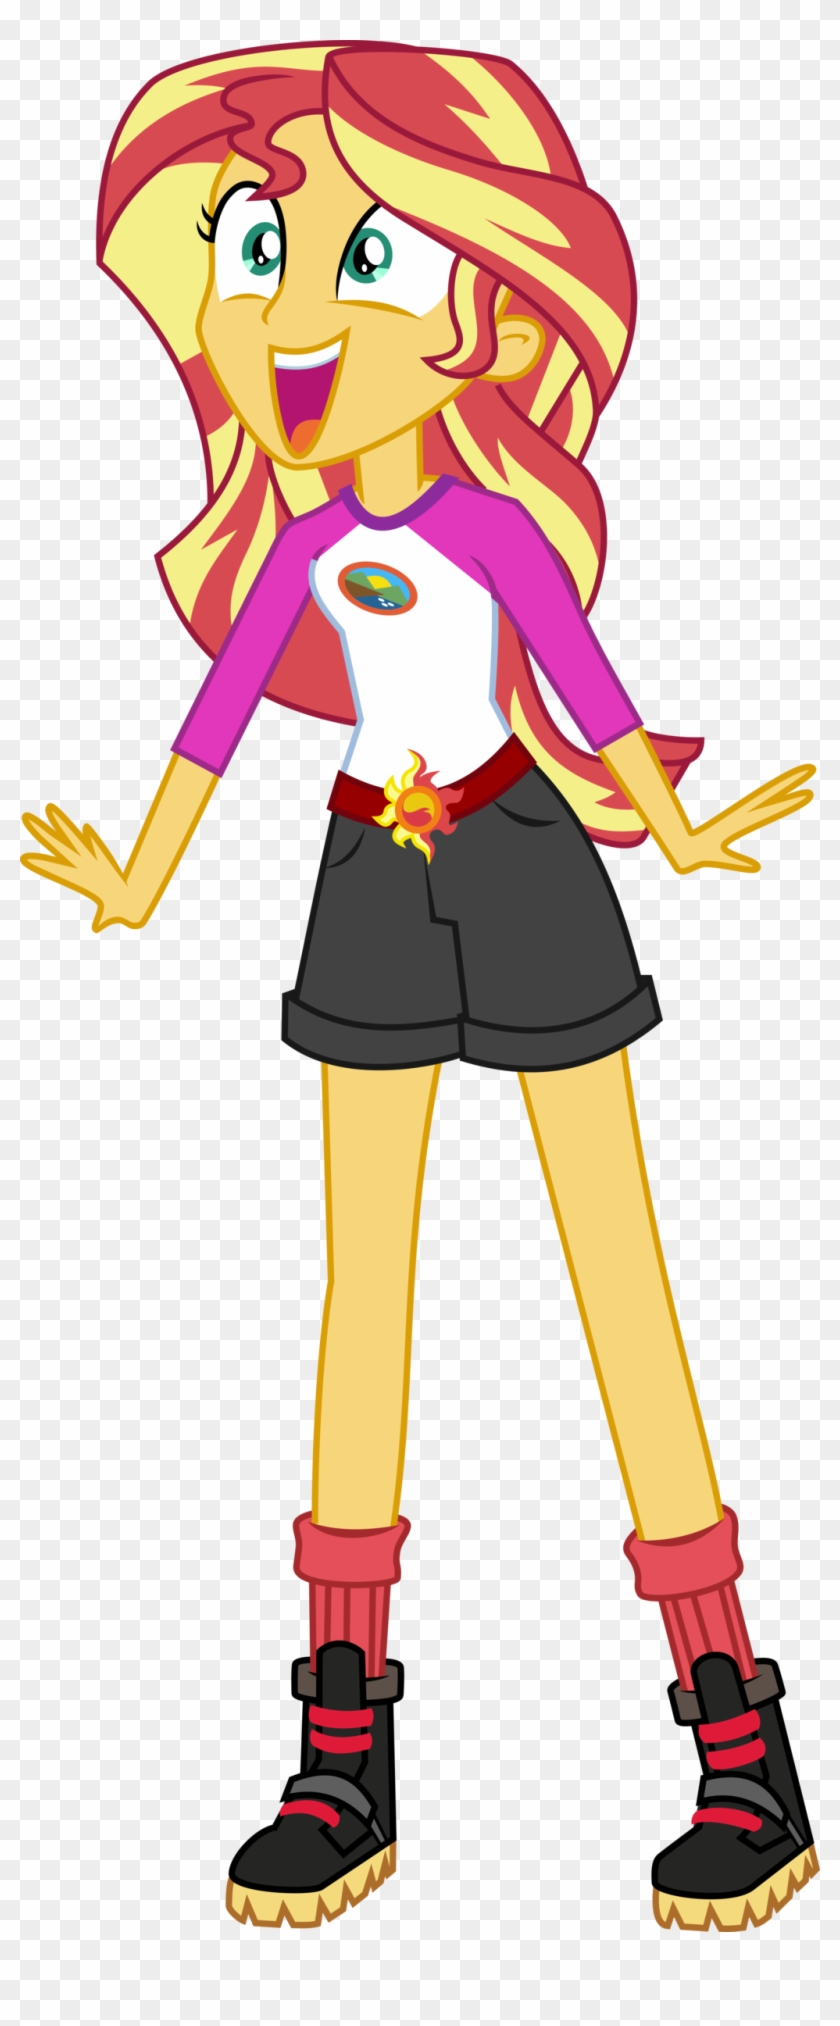 Sunset Shimmer Super Excited By Uponia Sunset Shimmer - Sunset Shimmer Digital Series #336536